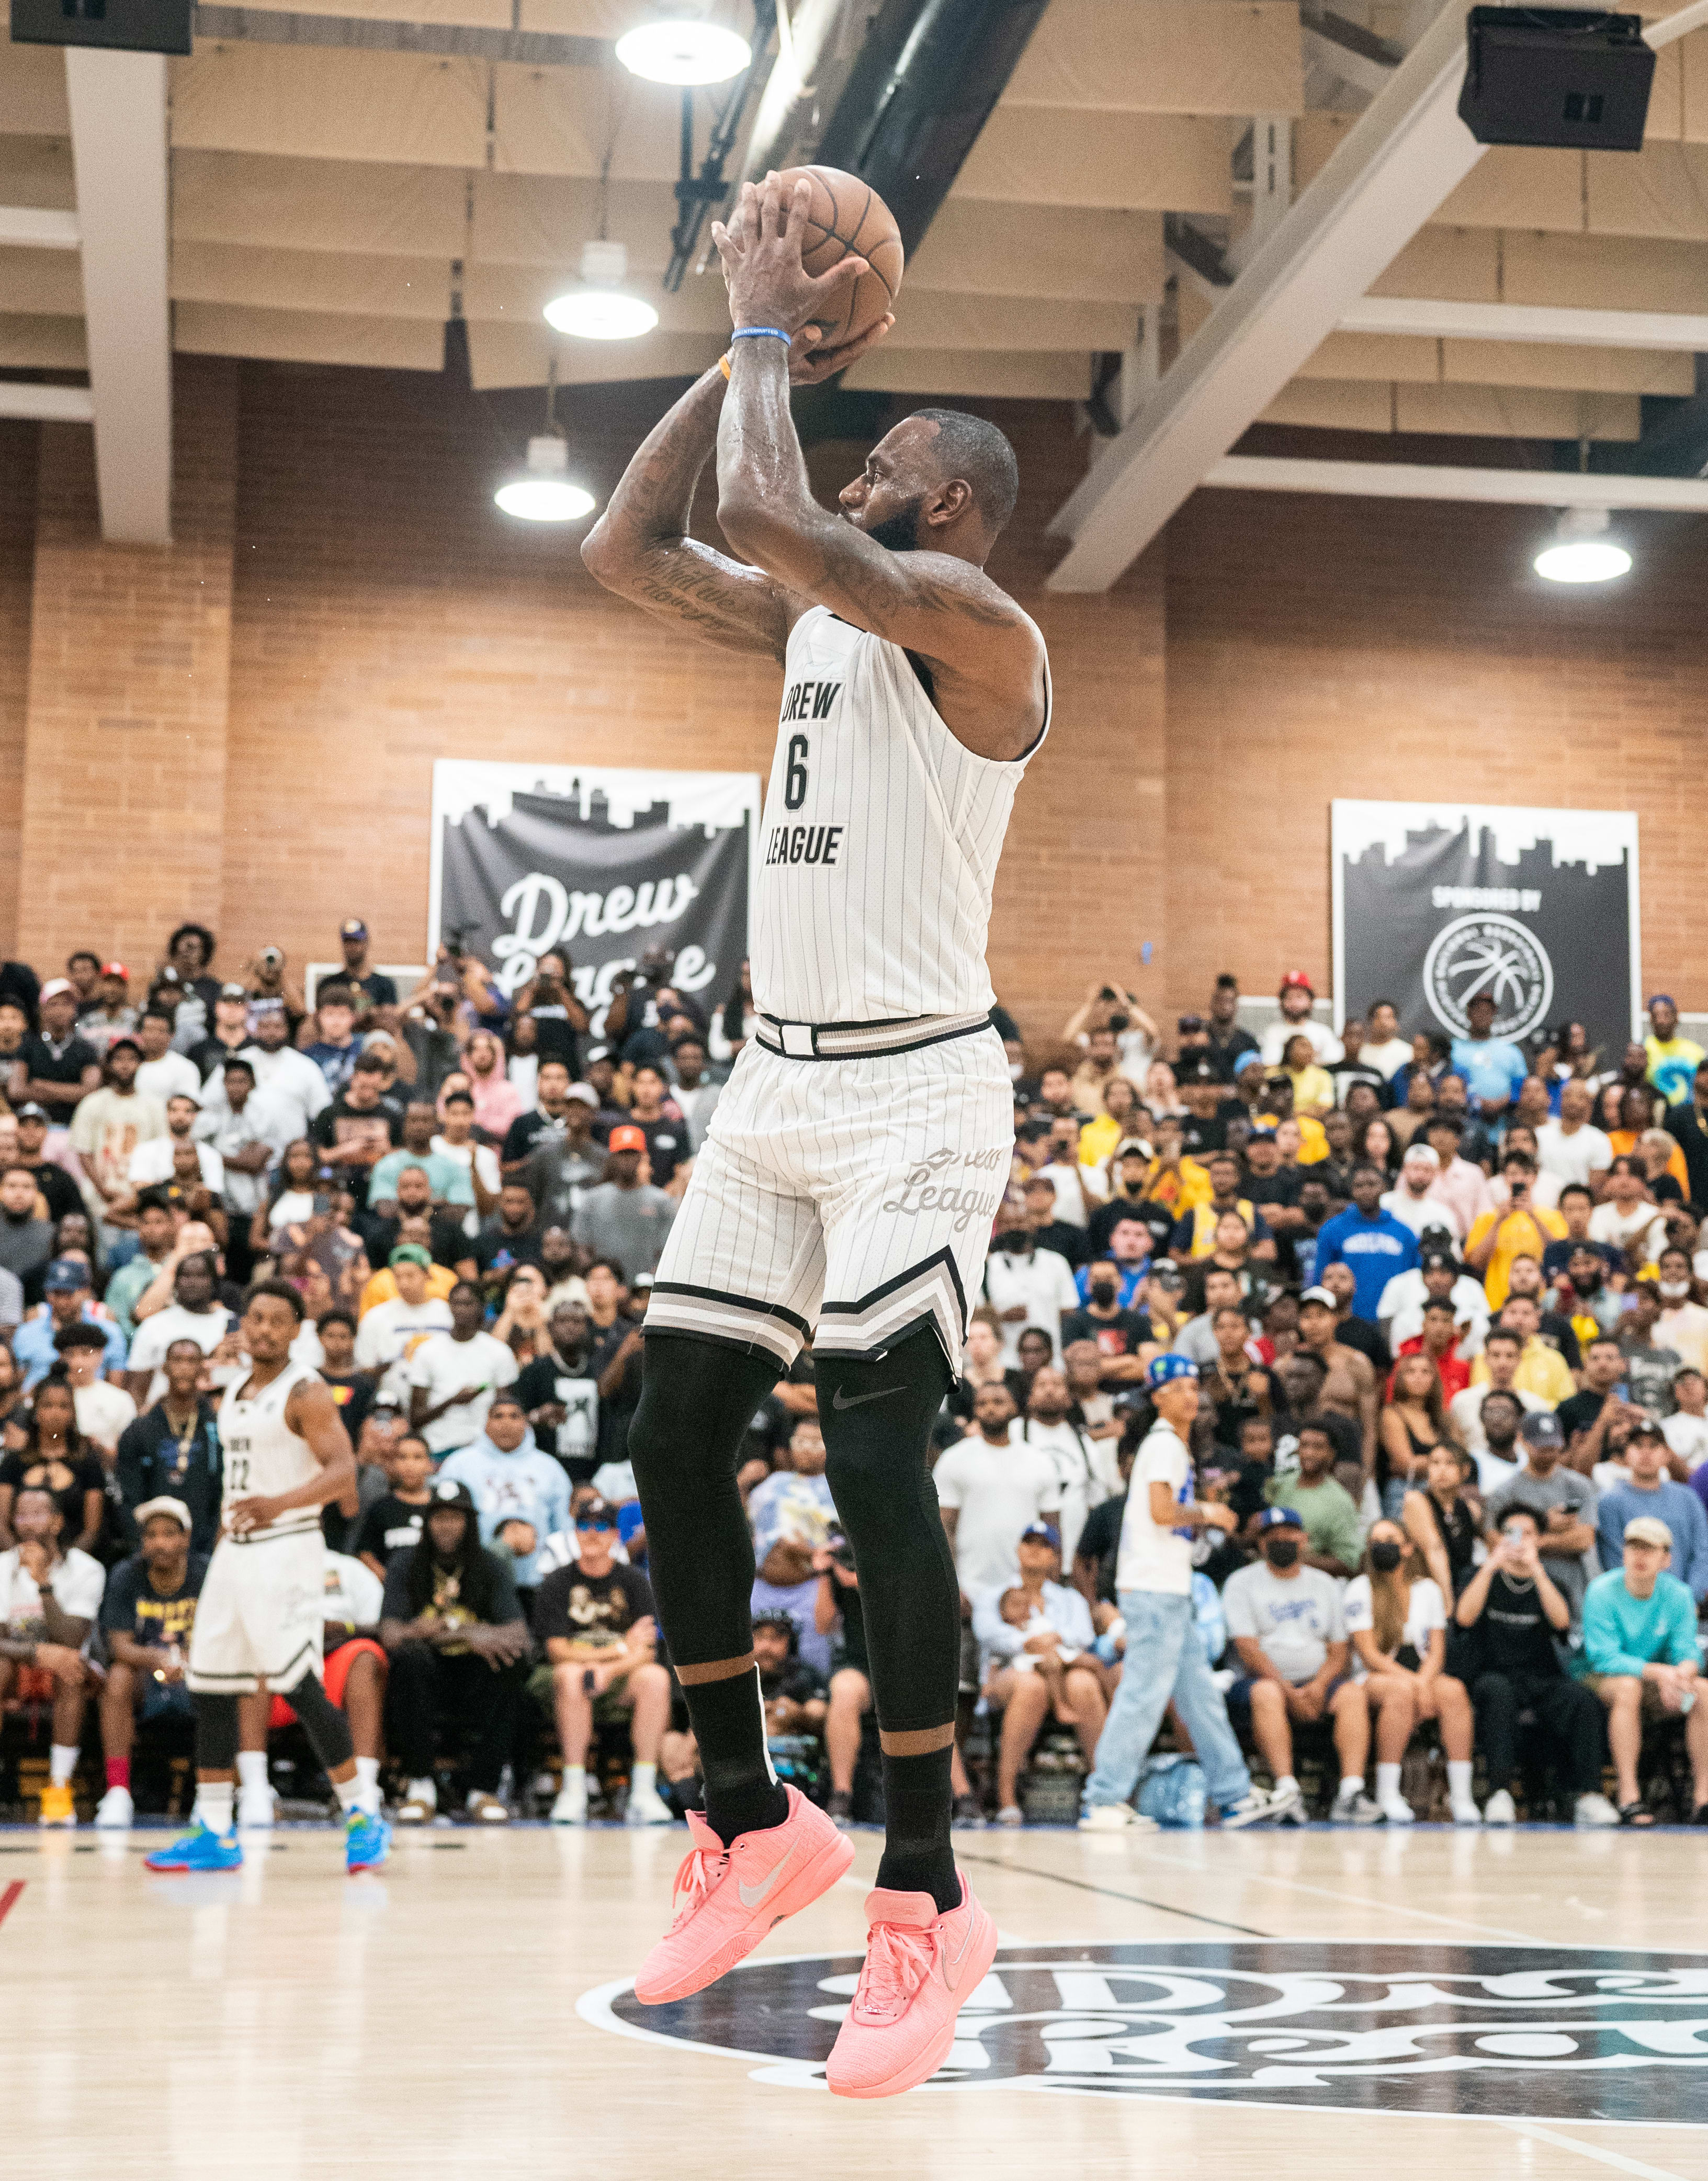 LeBron James shoots in the Drew League on July 16, 2022